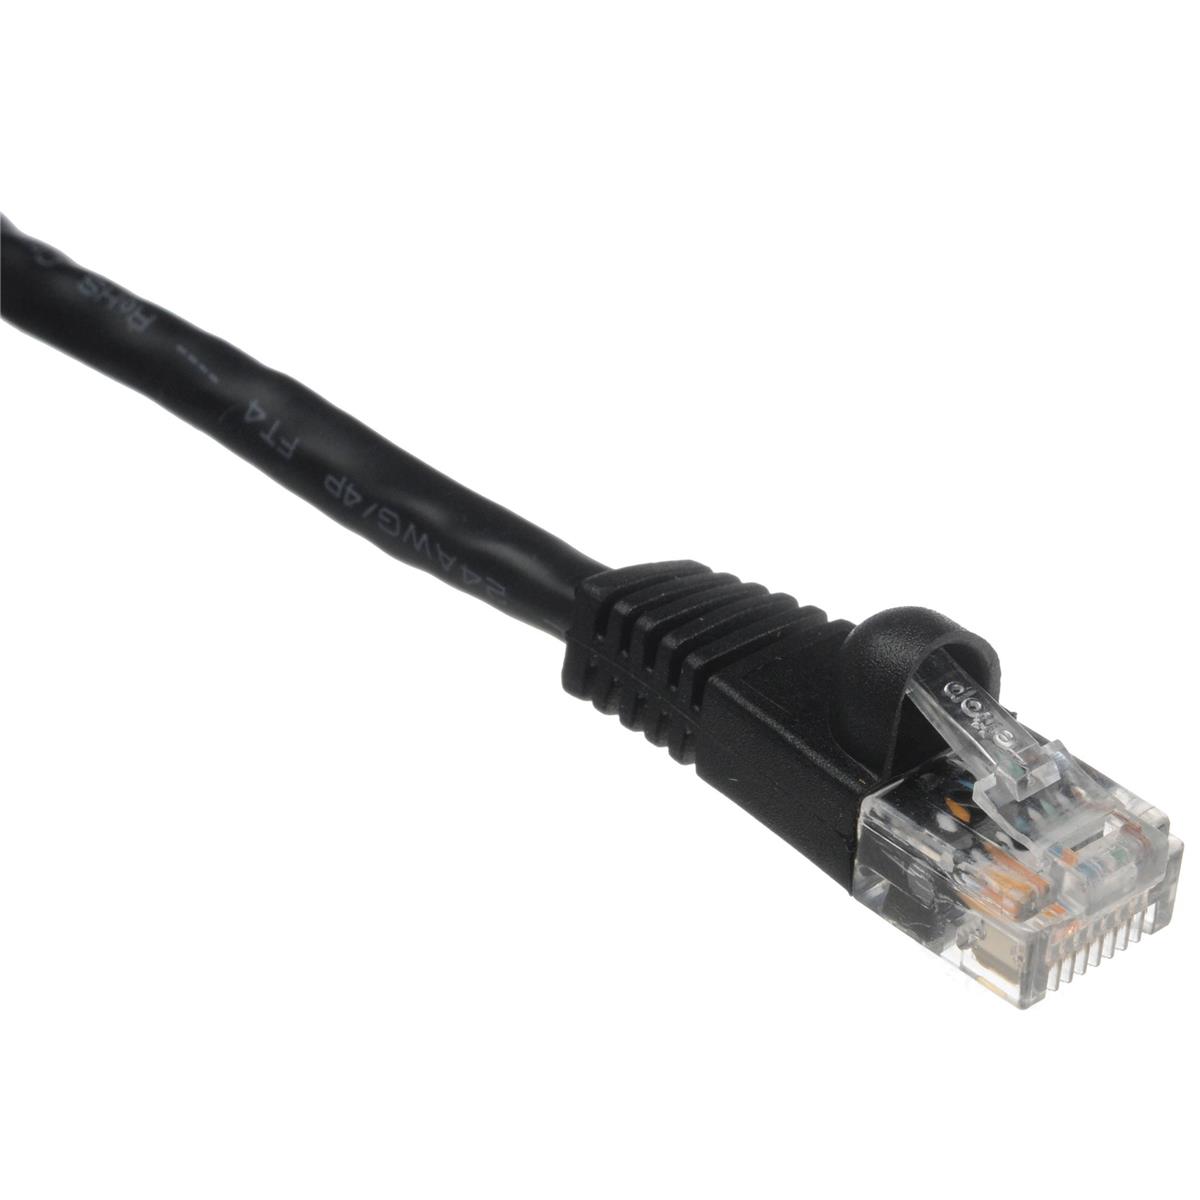 Photos - Other for Computer Comprehensive 10' Cat5e 350Mhz Snagless Patch Cable, Black CAT5-350-10BLK 